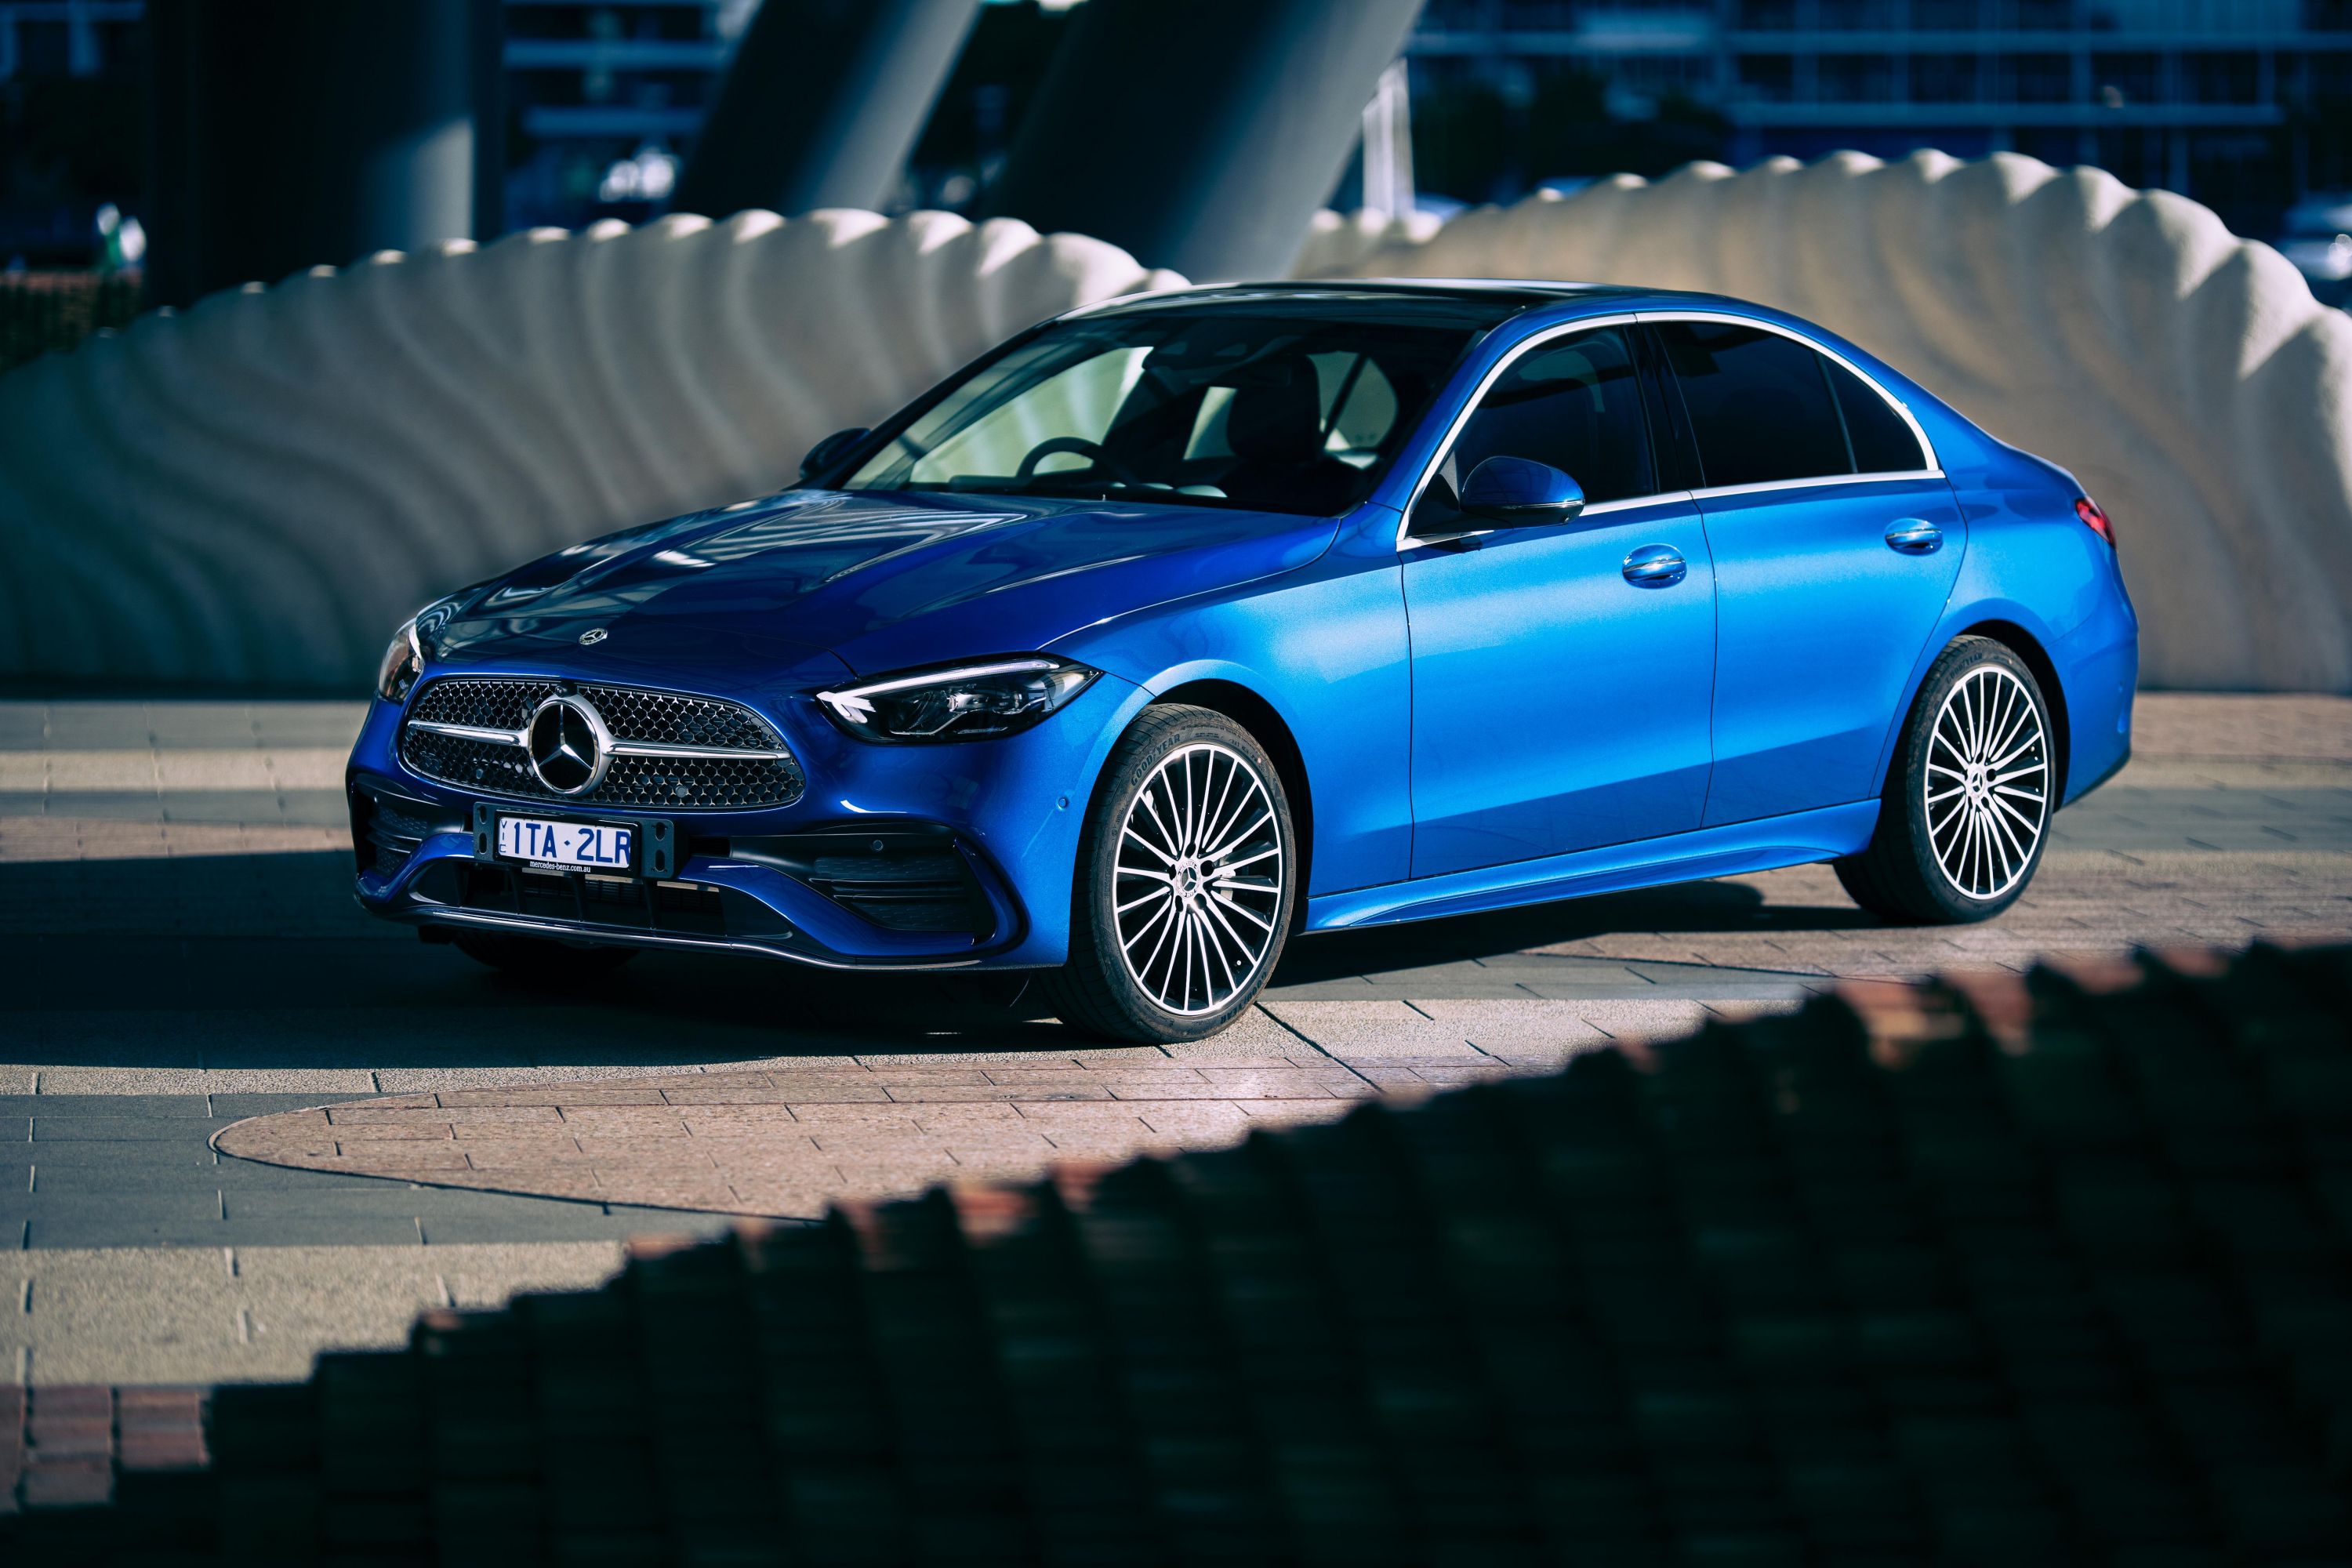 2022 Mercedes C-Class: A New Generation of Luxury